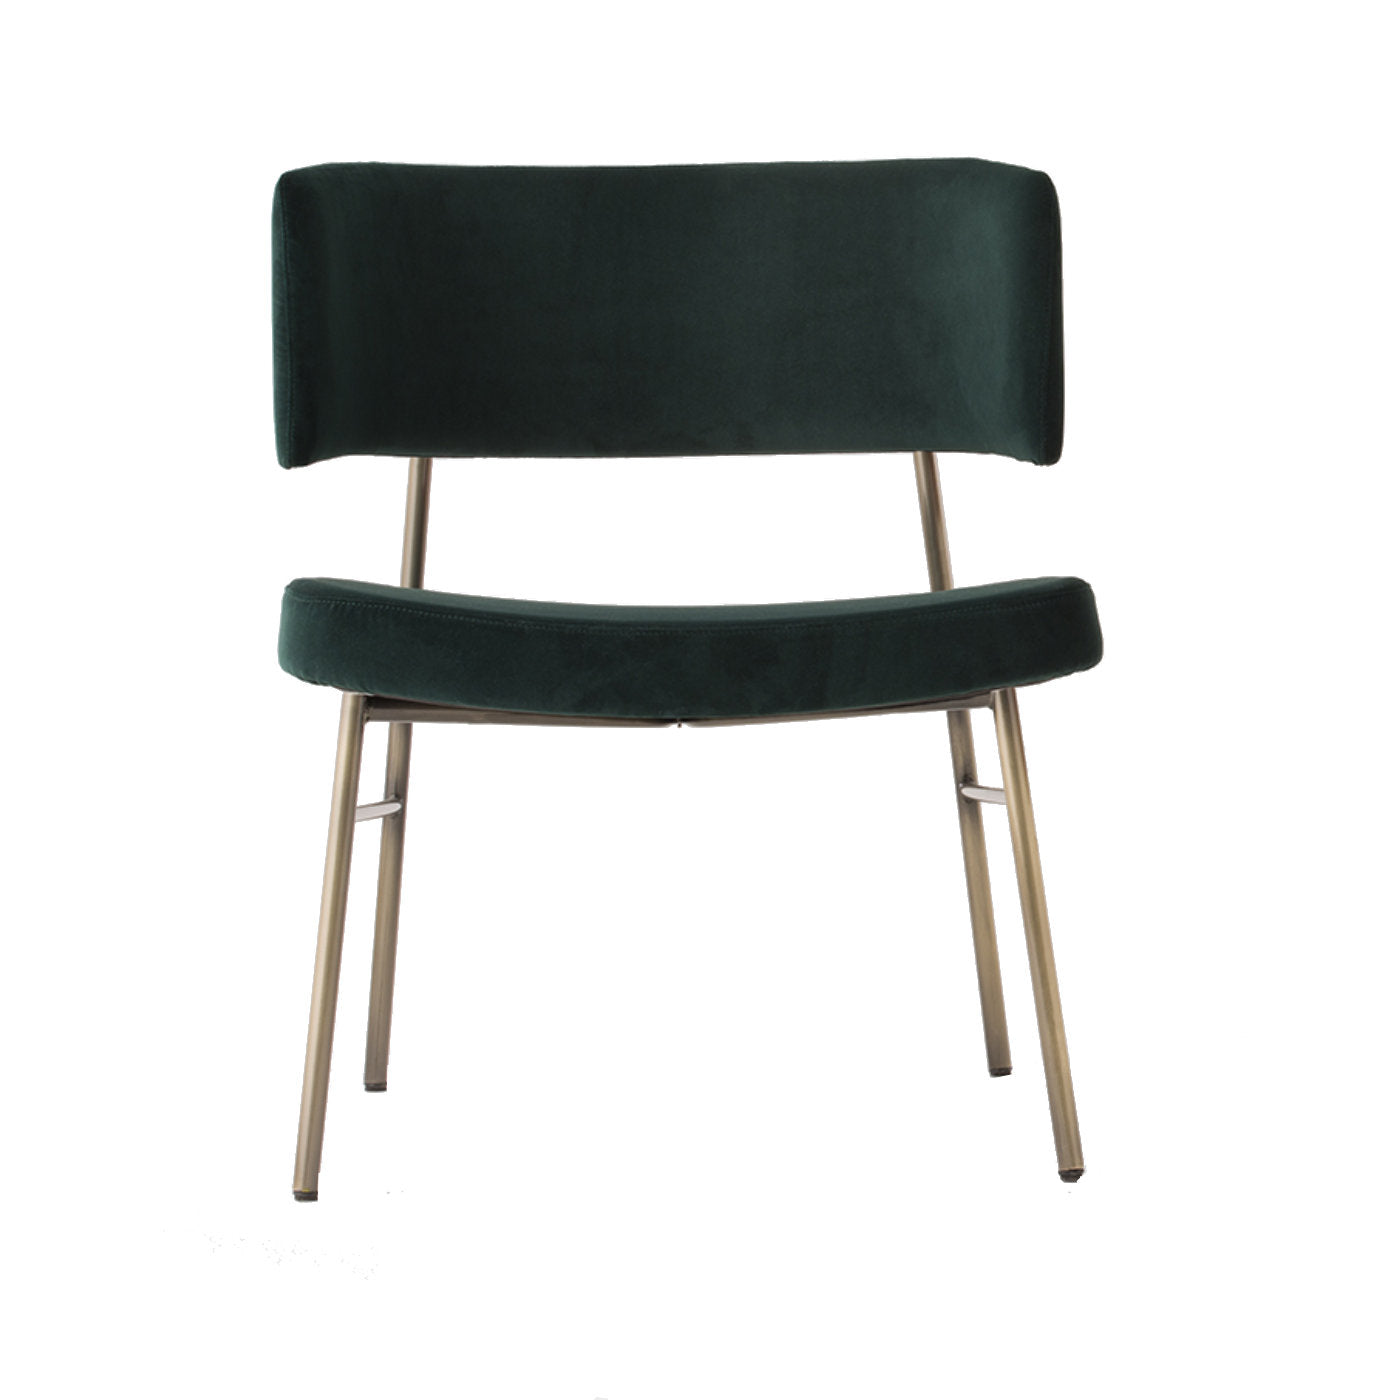 Marlen Green Lounge Chair by EP Studio - Main view